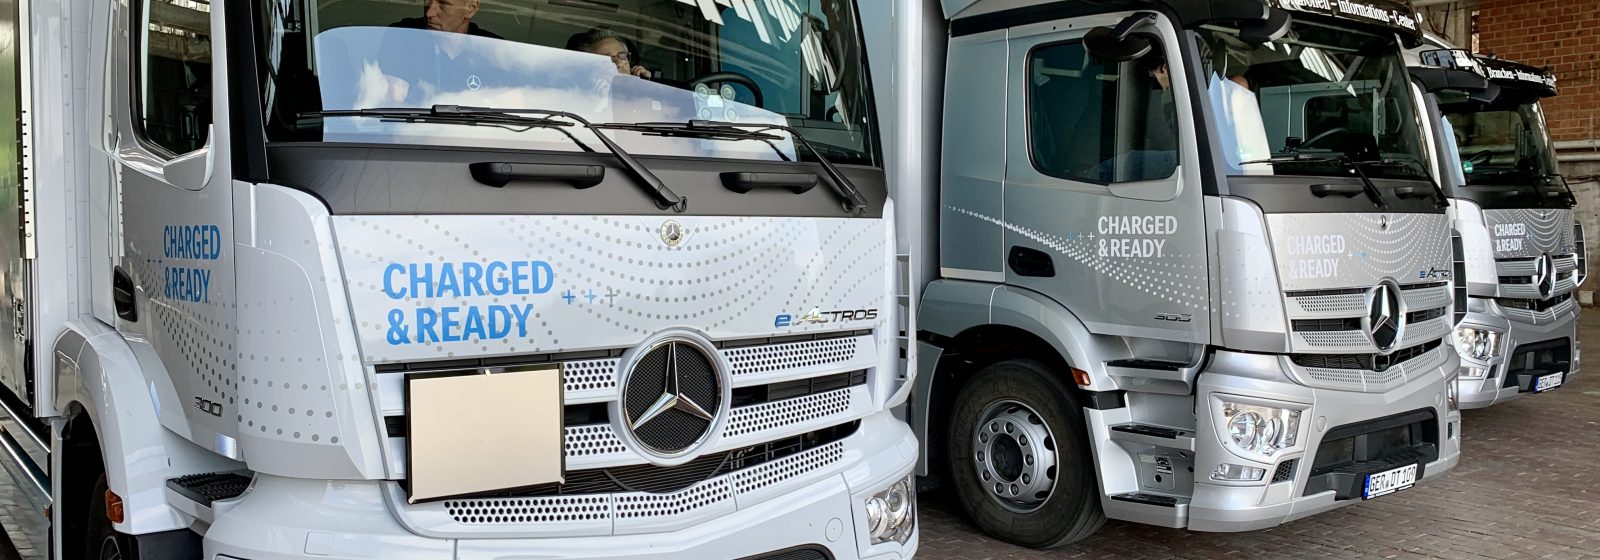 Mercedes-Benz Trucks - Charged & Ready event